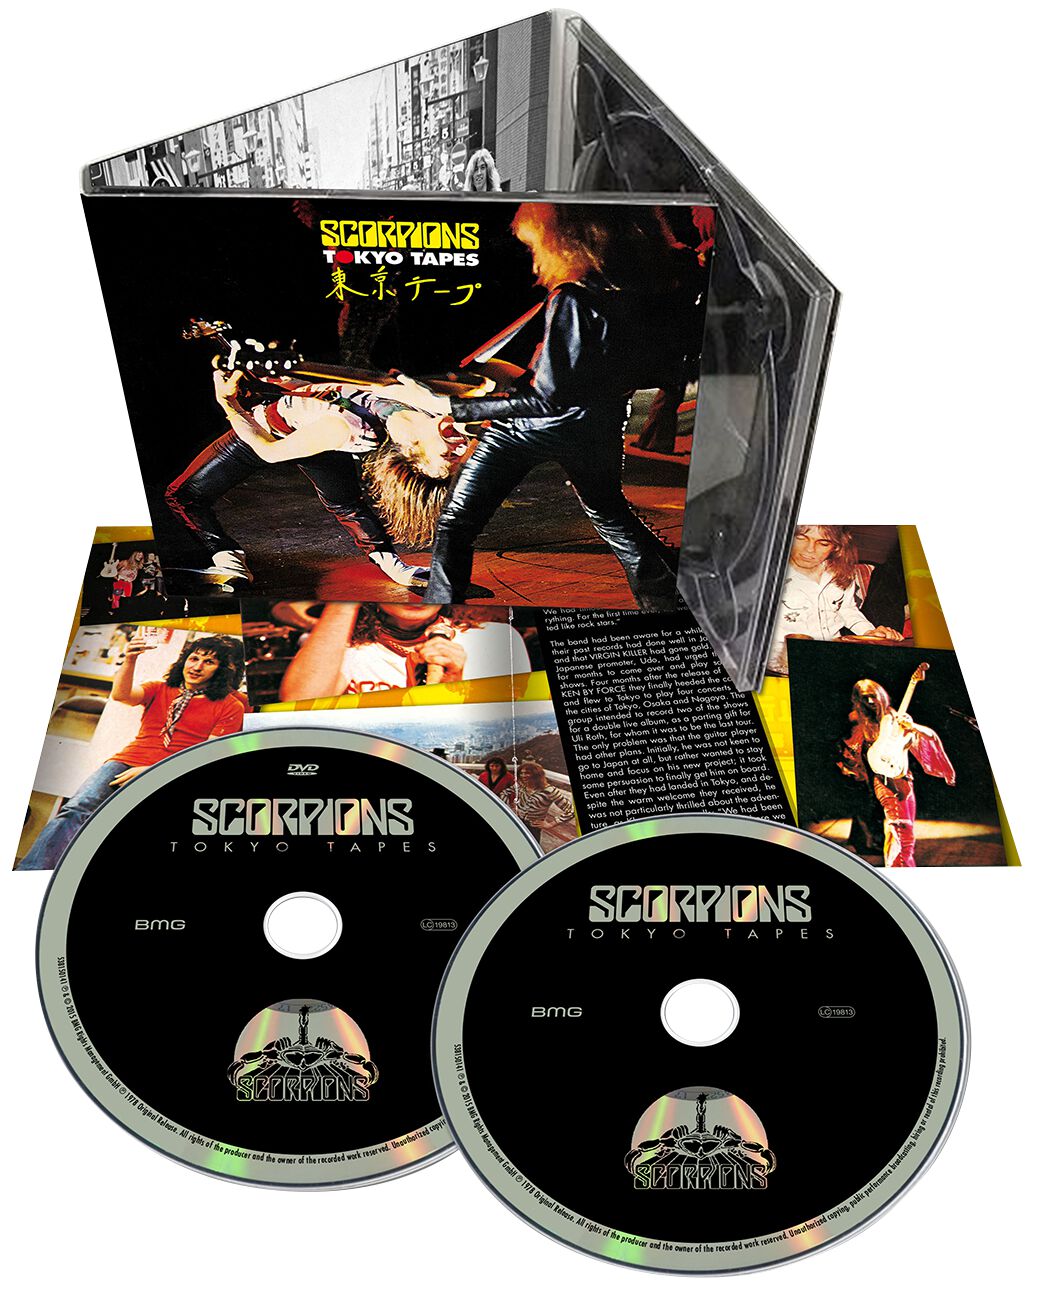 Image of Scorpions Tokyo tapes 2-CD Standard